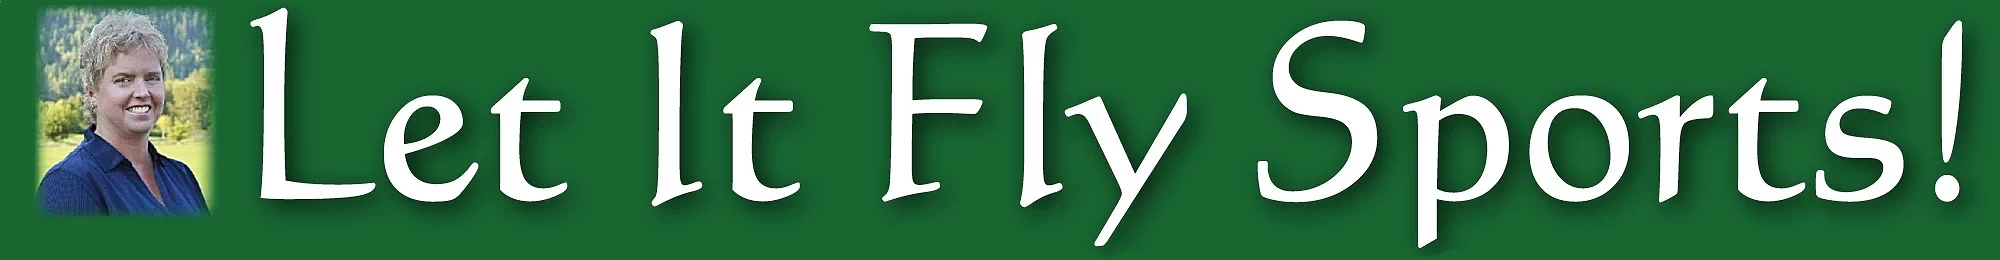 LetItFlySports.com header logo for promotional items, team & corporate sales, screen printing and embroidery